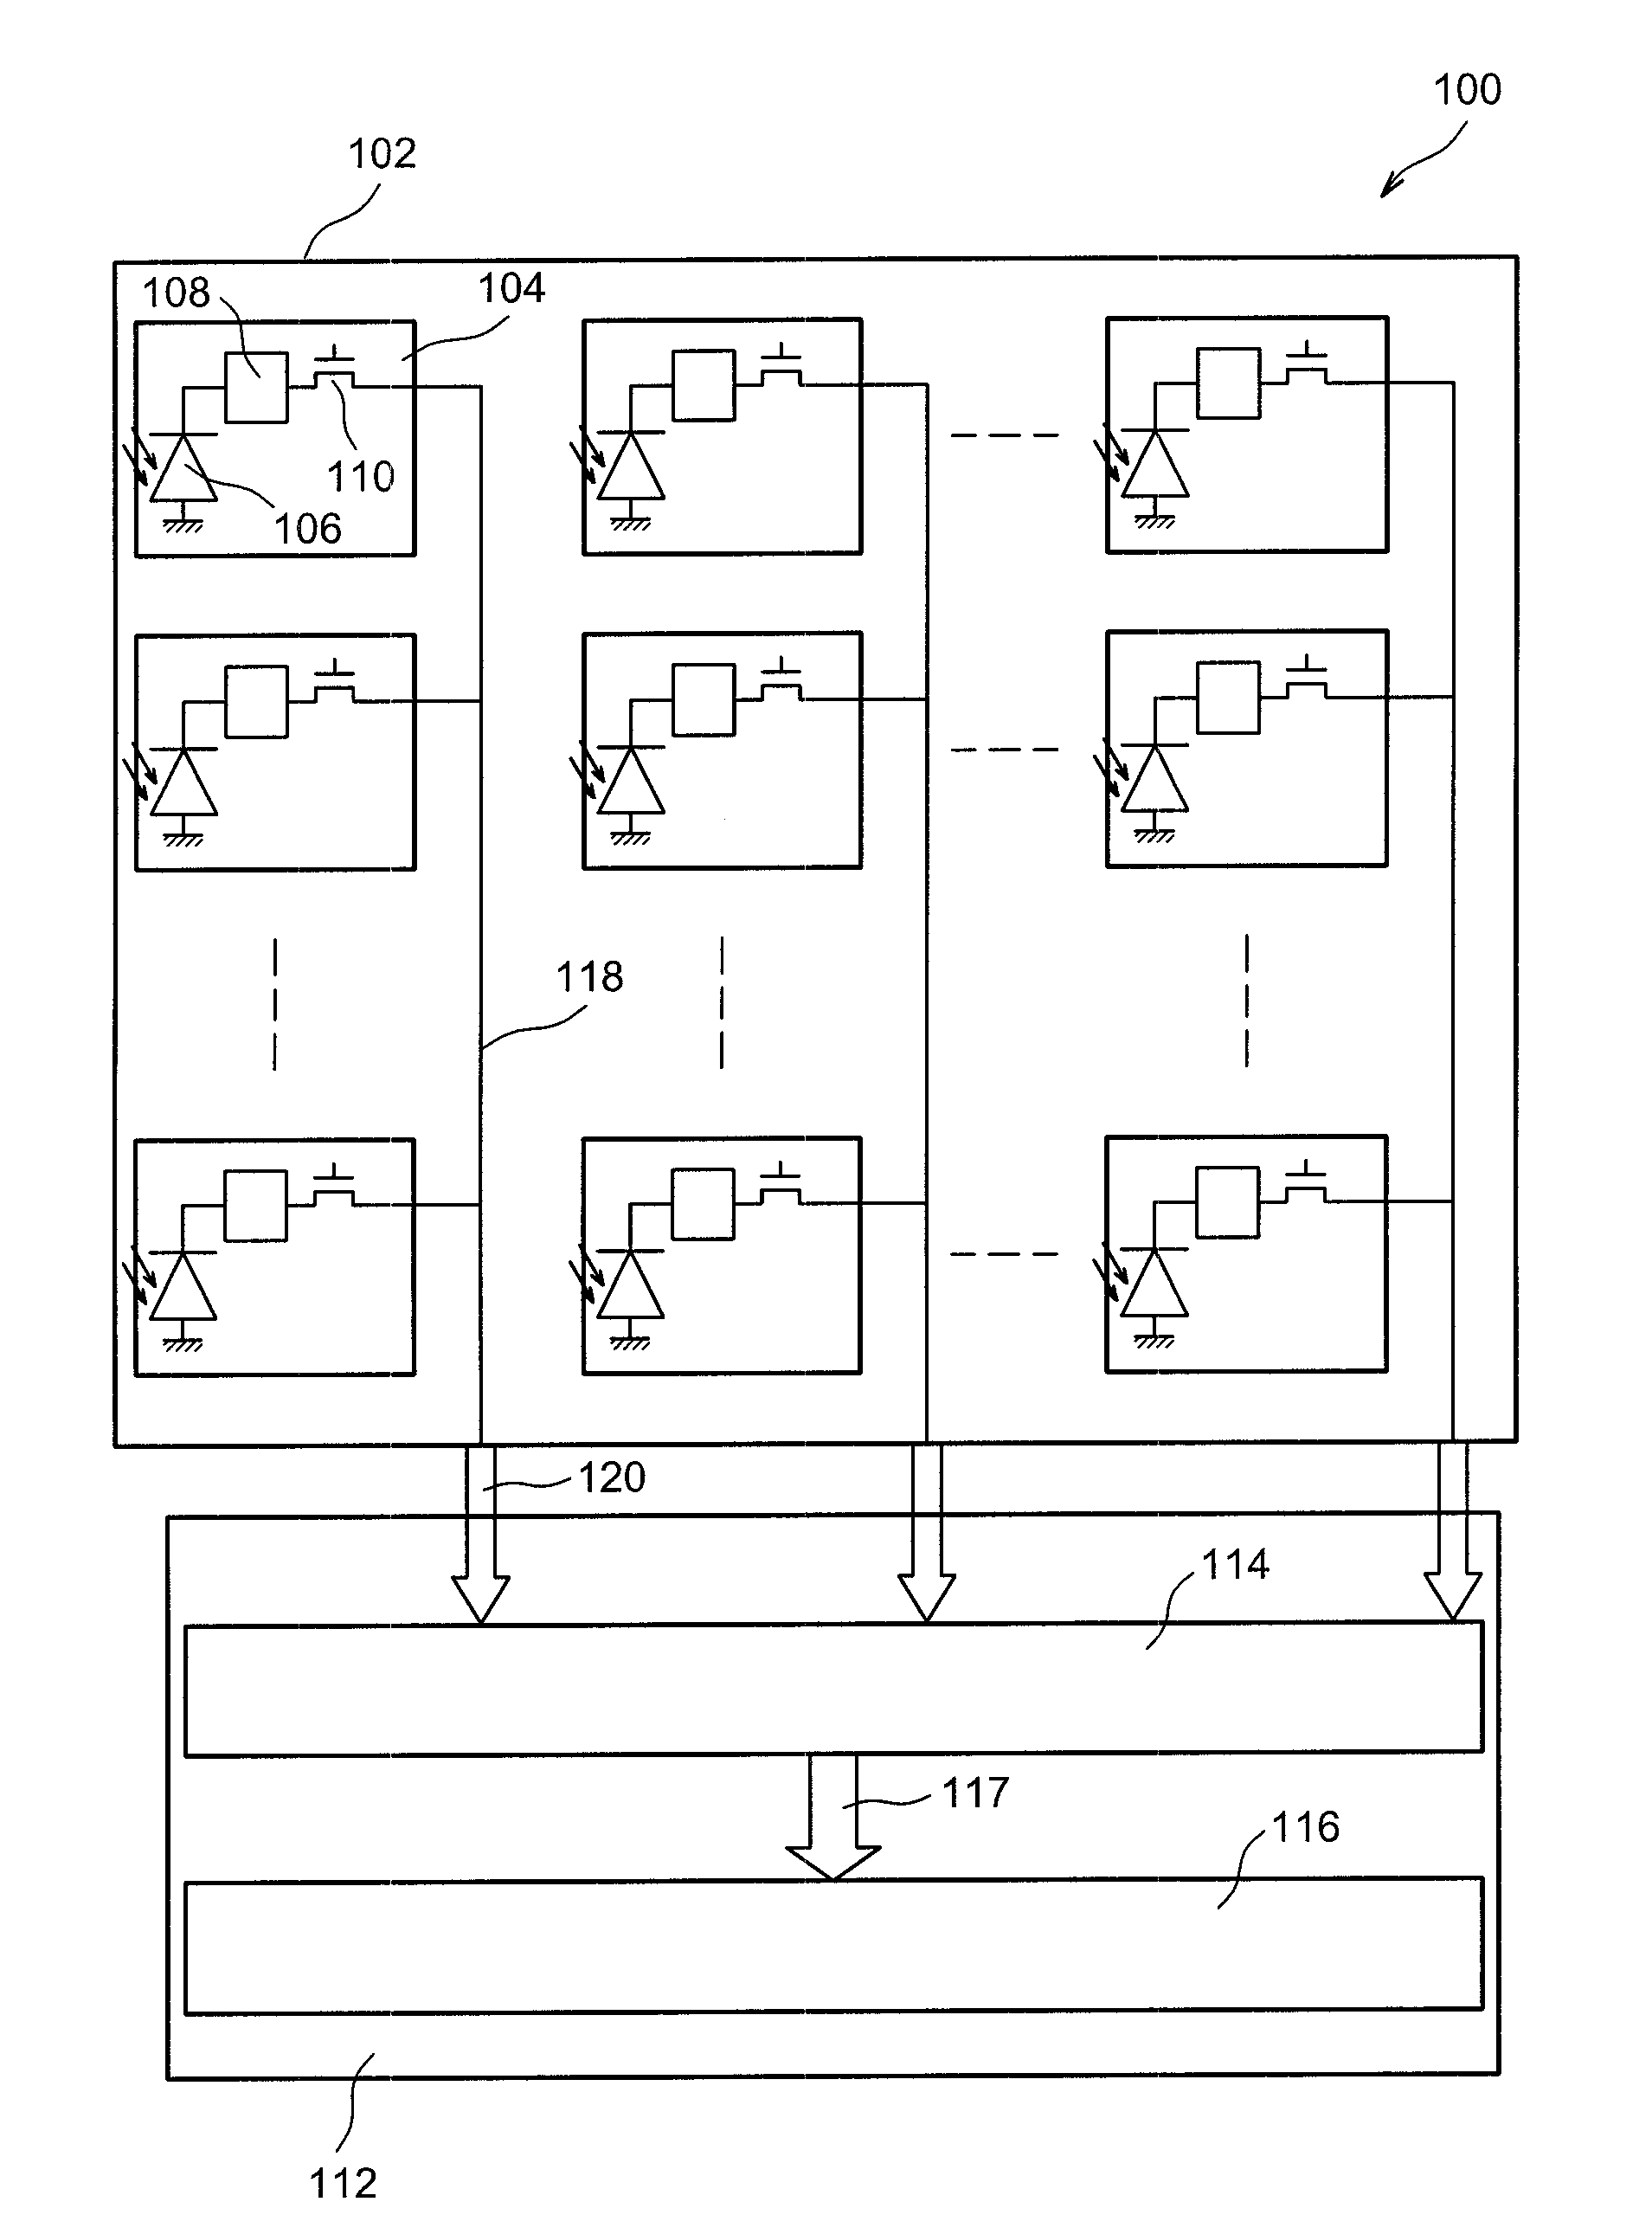 CMOS imaging device with three-dimensional architecture